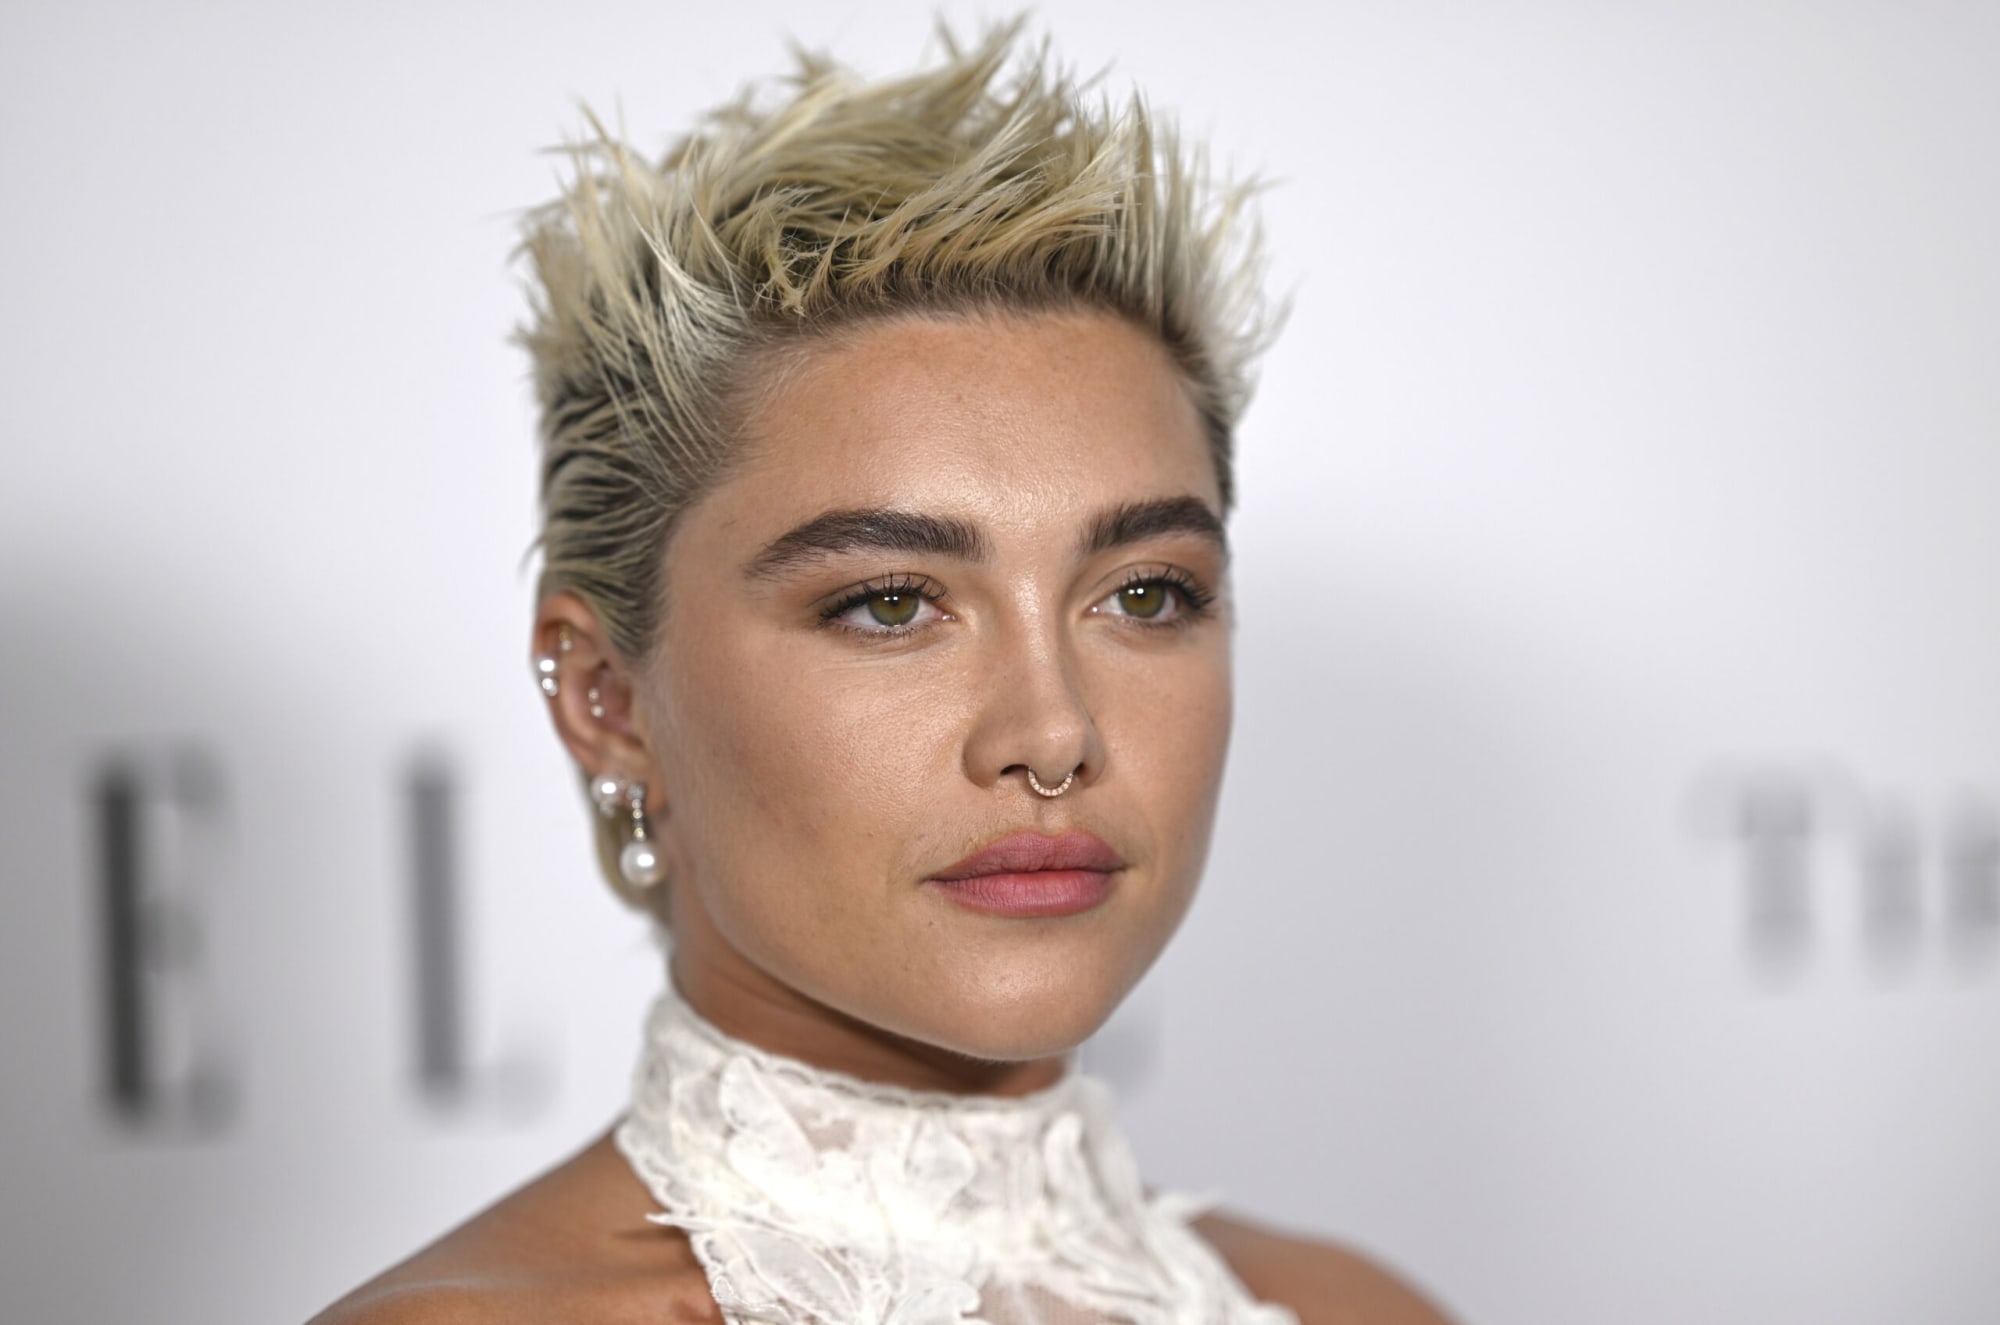 THE LAST OF US Season 2 Has Cast Abby And THUNDERBOLTS Star Florence Pugh  Is Now Rumored For The Role